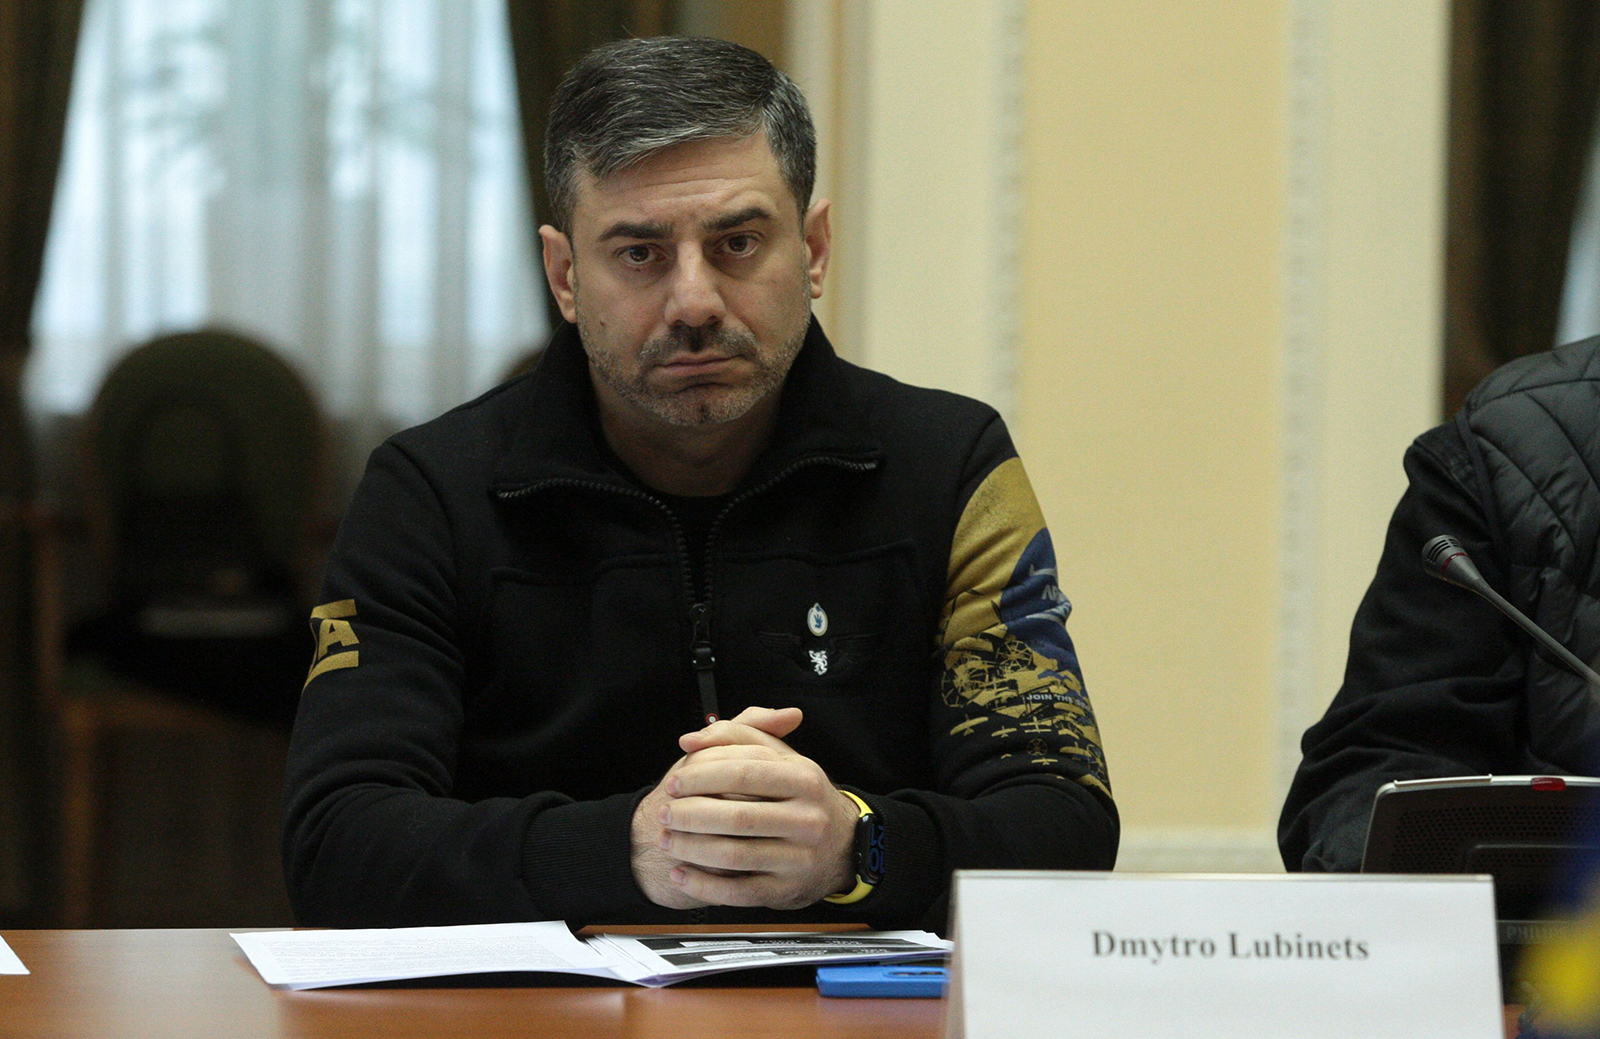 Dmytro Lubinets attends a meeting in Kyiv, Ukraine on April 20.